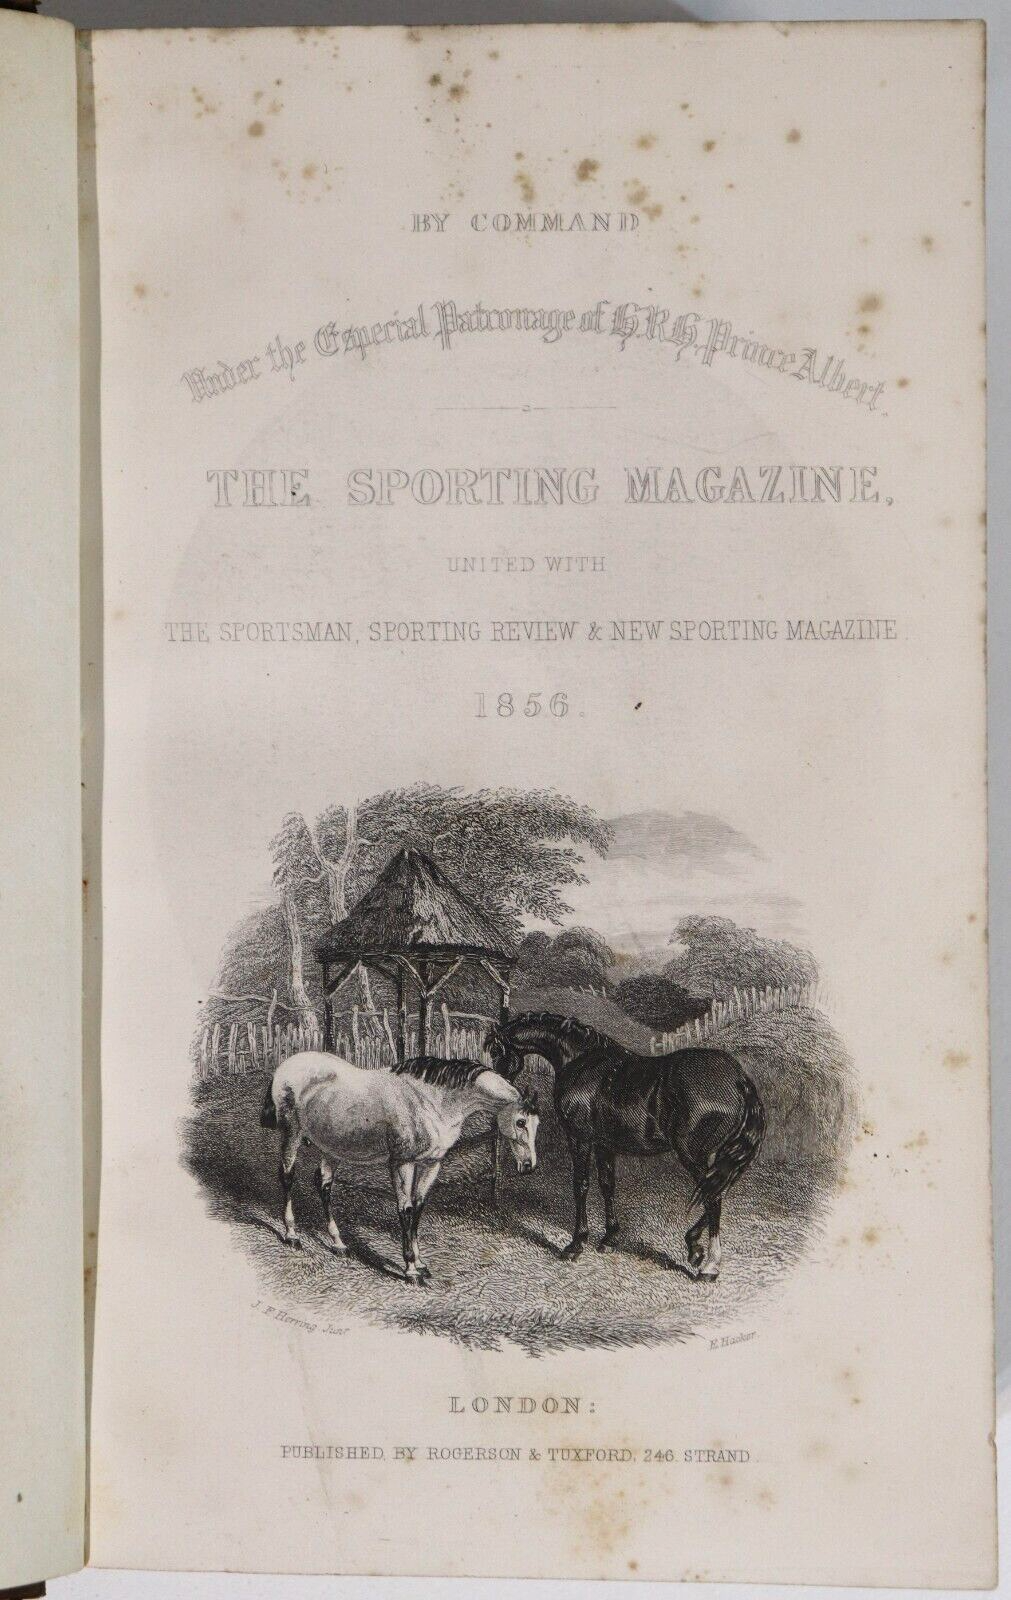 The Sporting Magazine & Sporting Review - 1856 - Antiquarian Sport History Book